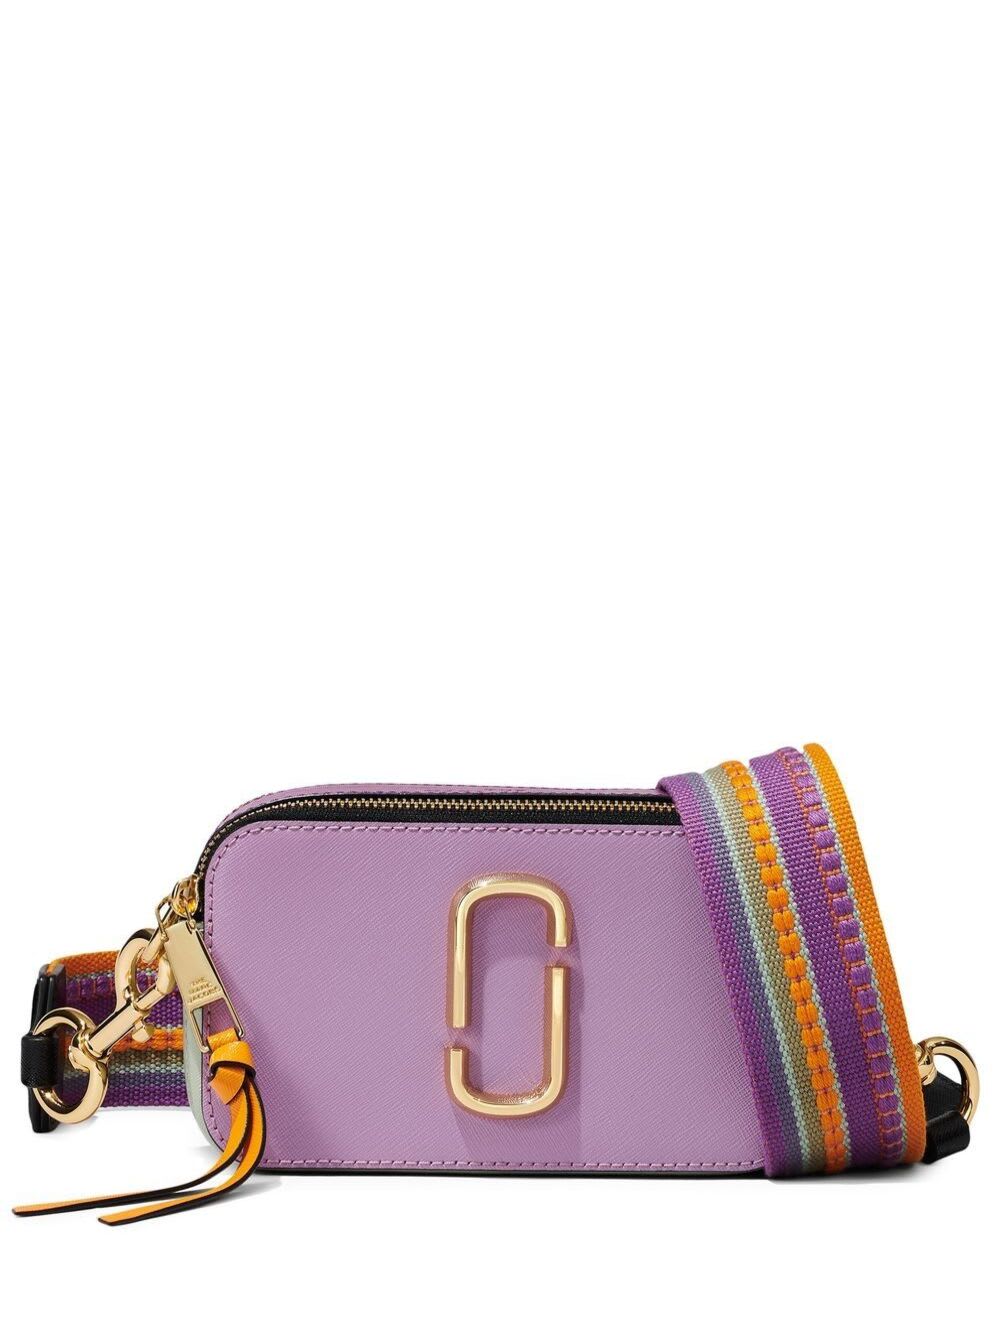 The Snapshot Colorblocked Lilac Leather Crossbody Bag Marc Jacobs Woman